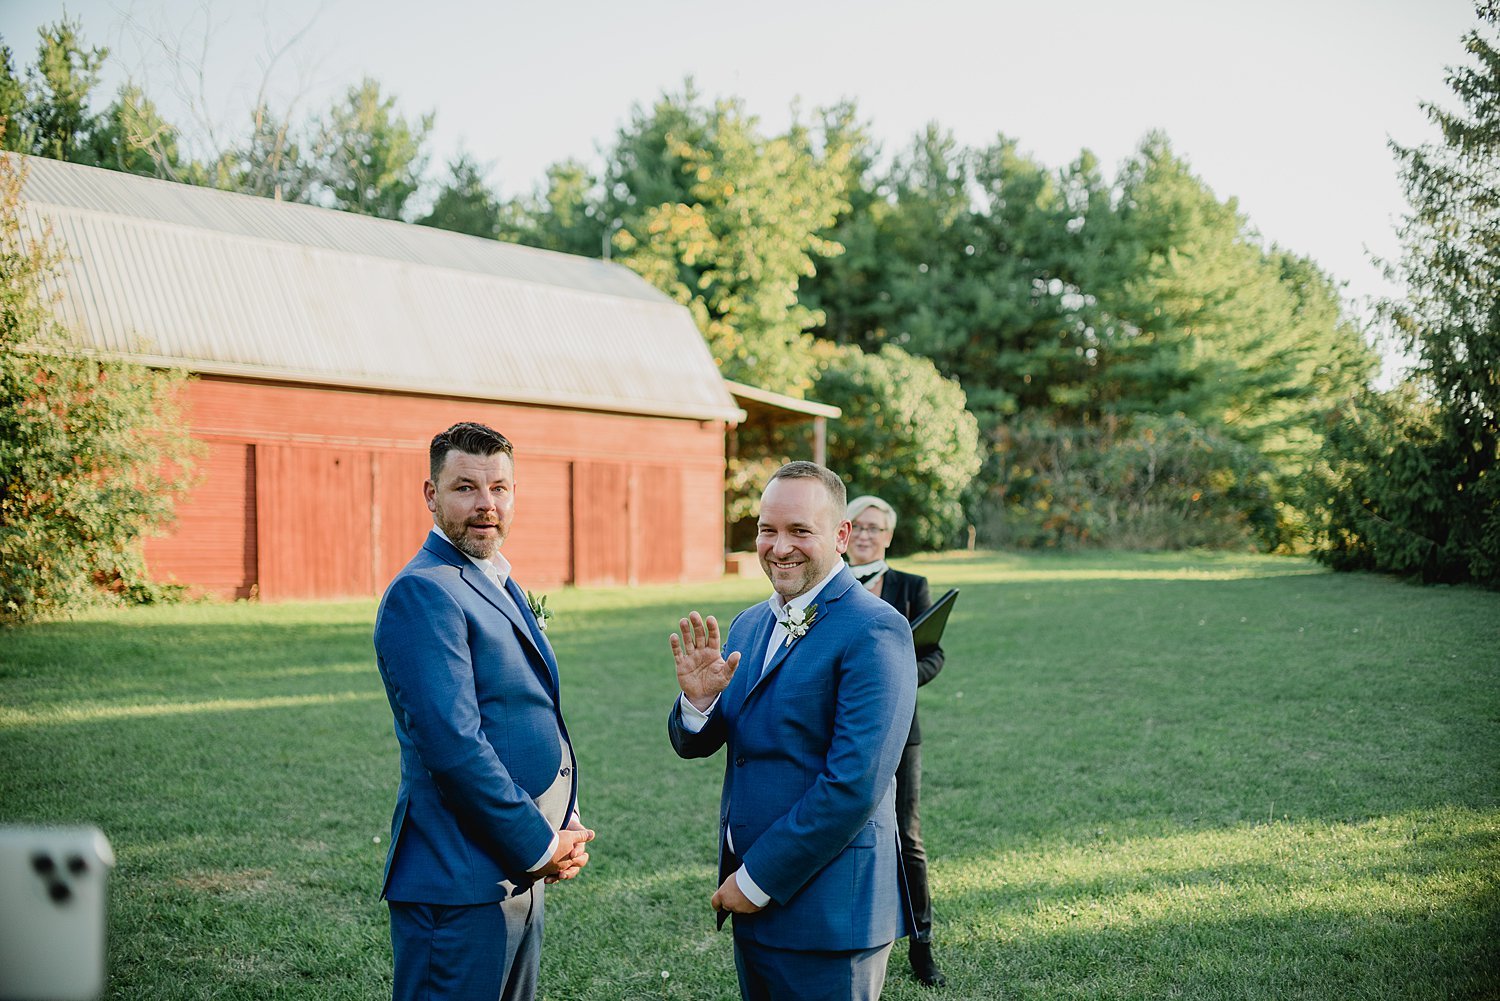 An Intimate Elopement at an Airbnb in Prince Edward County | Prince Edward County Wedding Photographer | Holly McMurter Photographs_0046.jpg